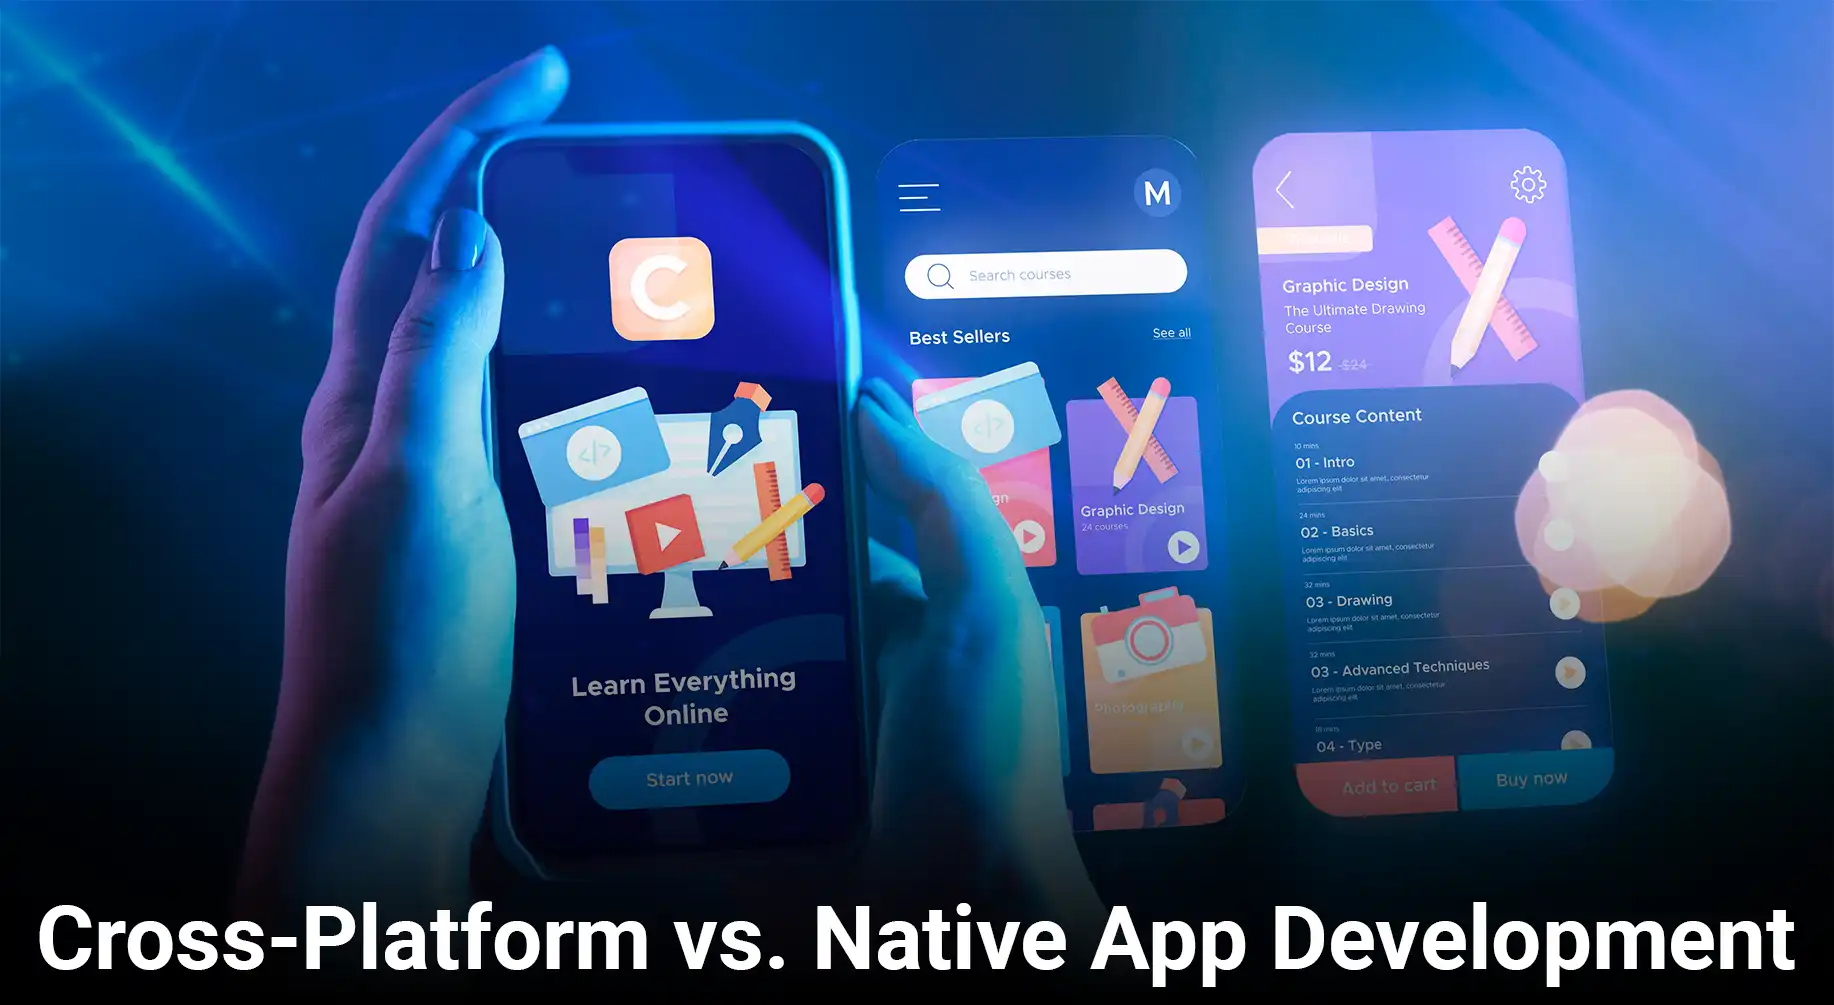 Native vs. Cross-Platform Mobile Games: Which Approach Is Better?